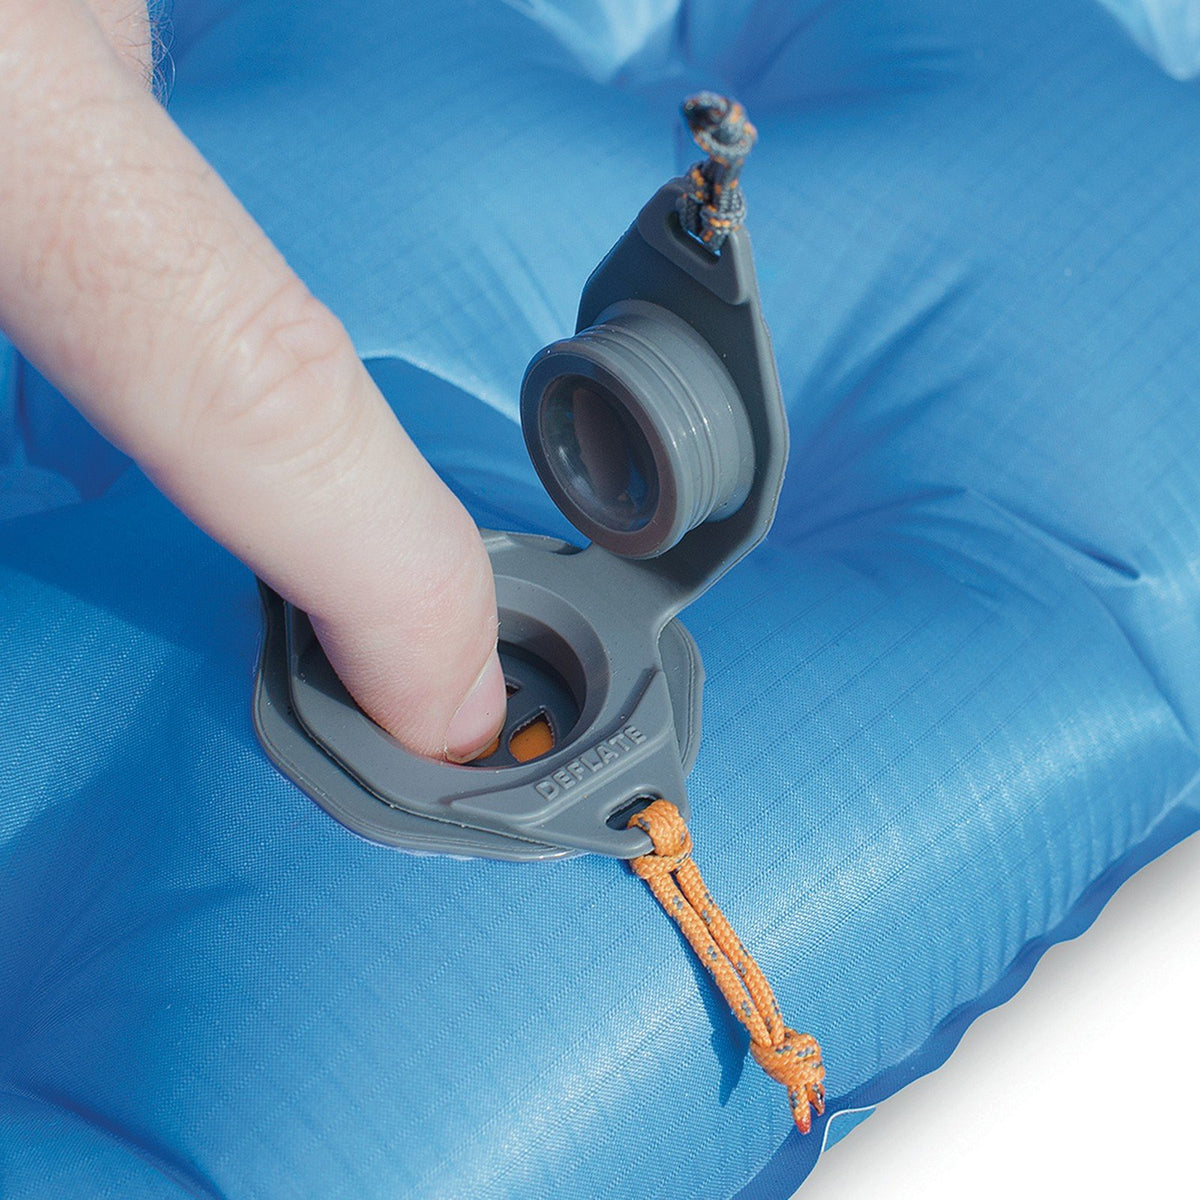 Sea to Summit UltraLight Insulated Mat, showing air valve detail